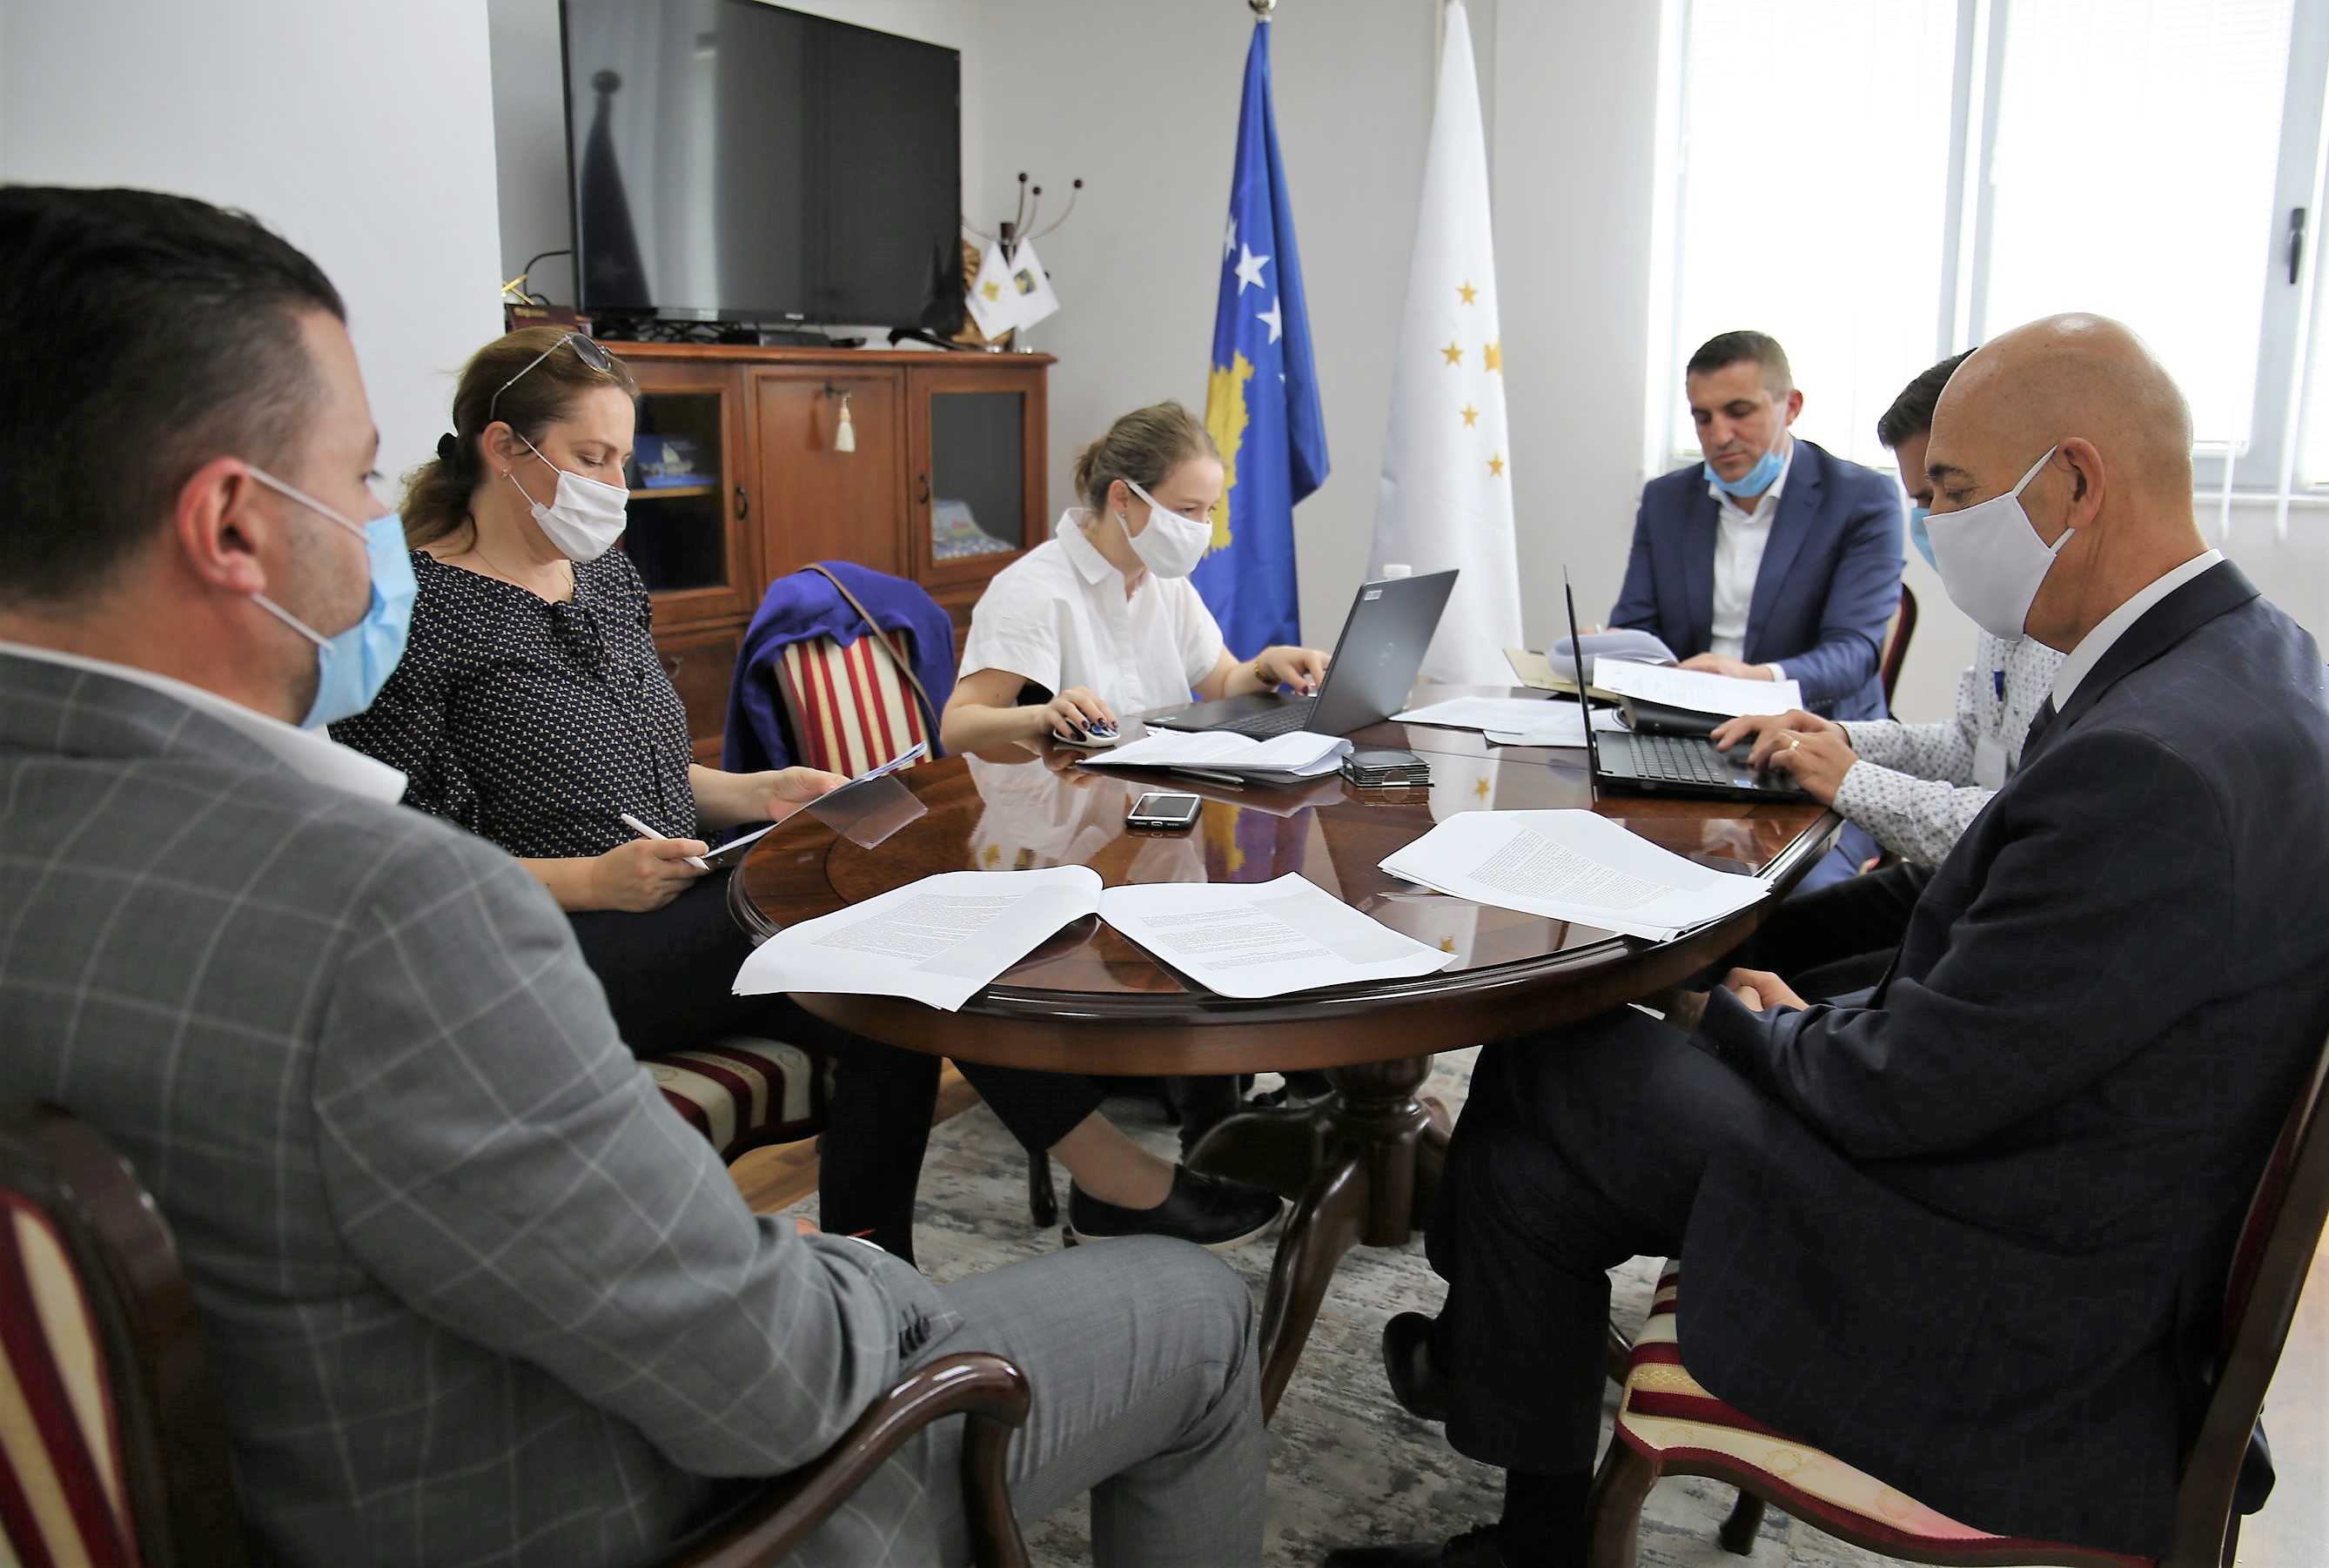 The next meeting of the Committee for Normative Issues of the KPC is held